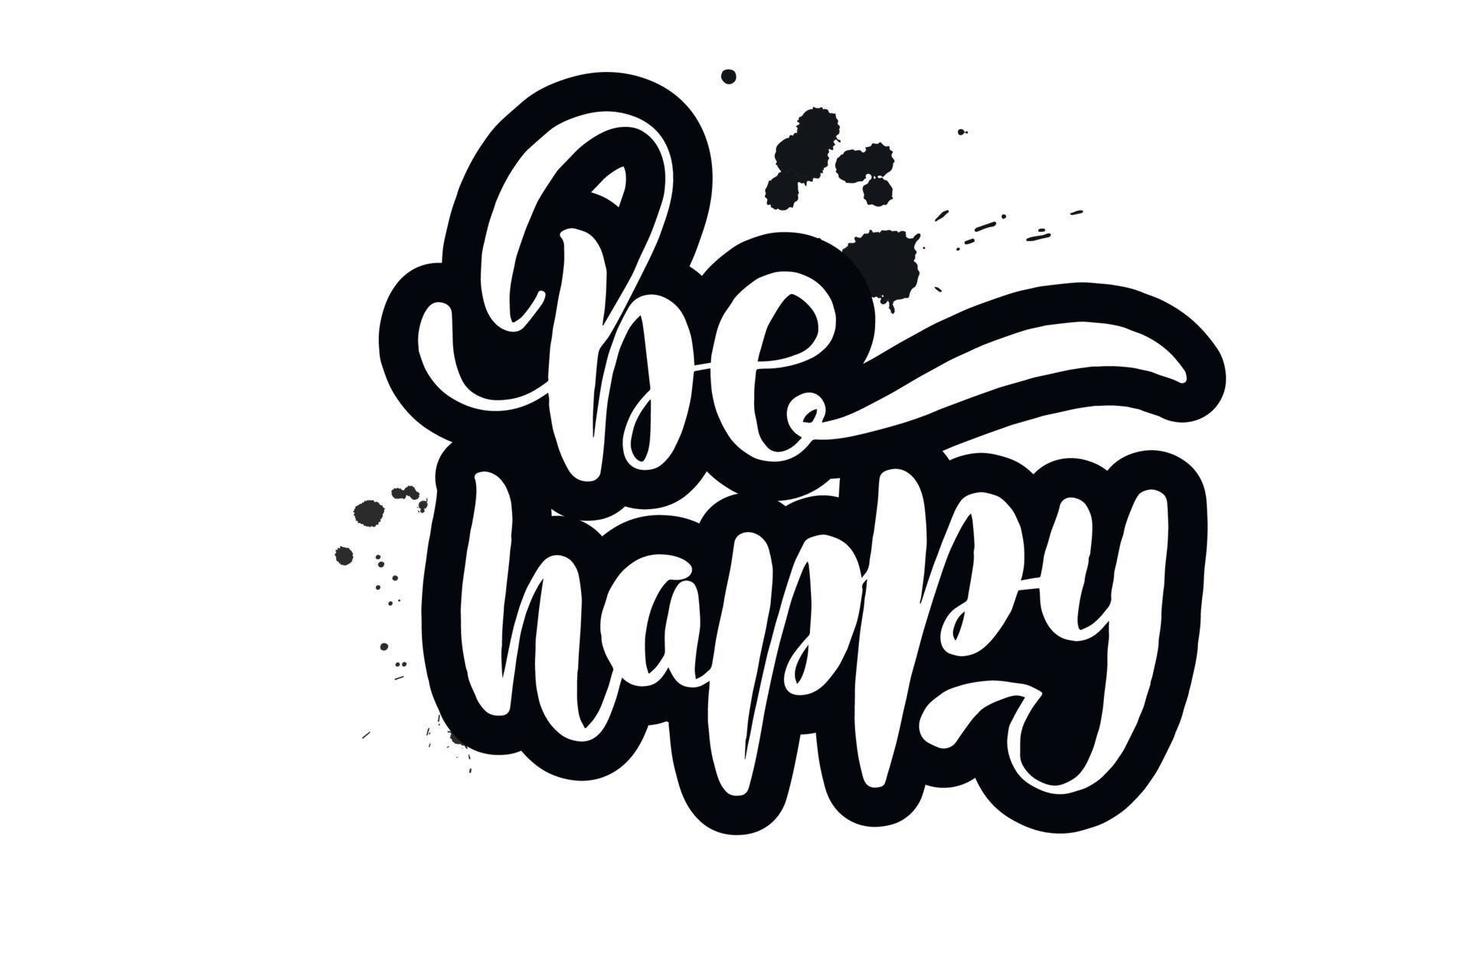 Inspirational handwritten brush lettering be happy. Vector calligraphy illustration isolated on white background. Typography for banners, badges, postcard, t shirt, prints, posters.